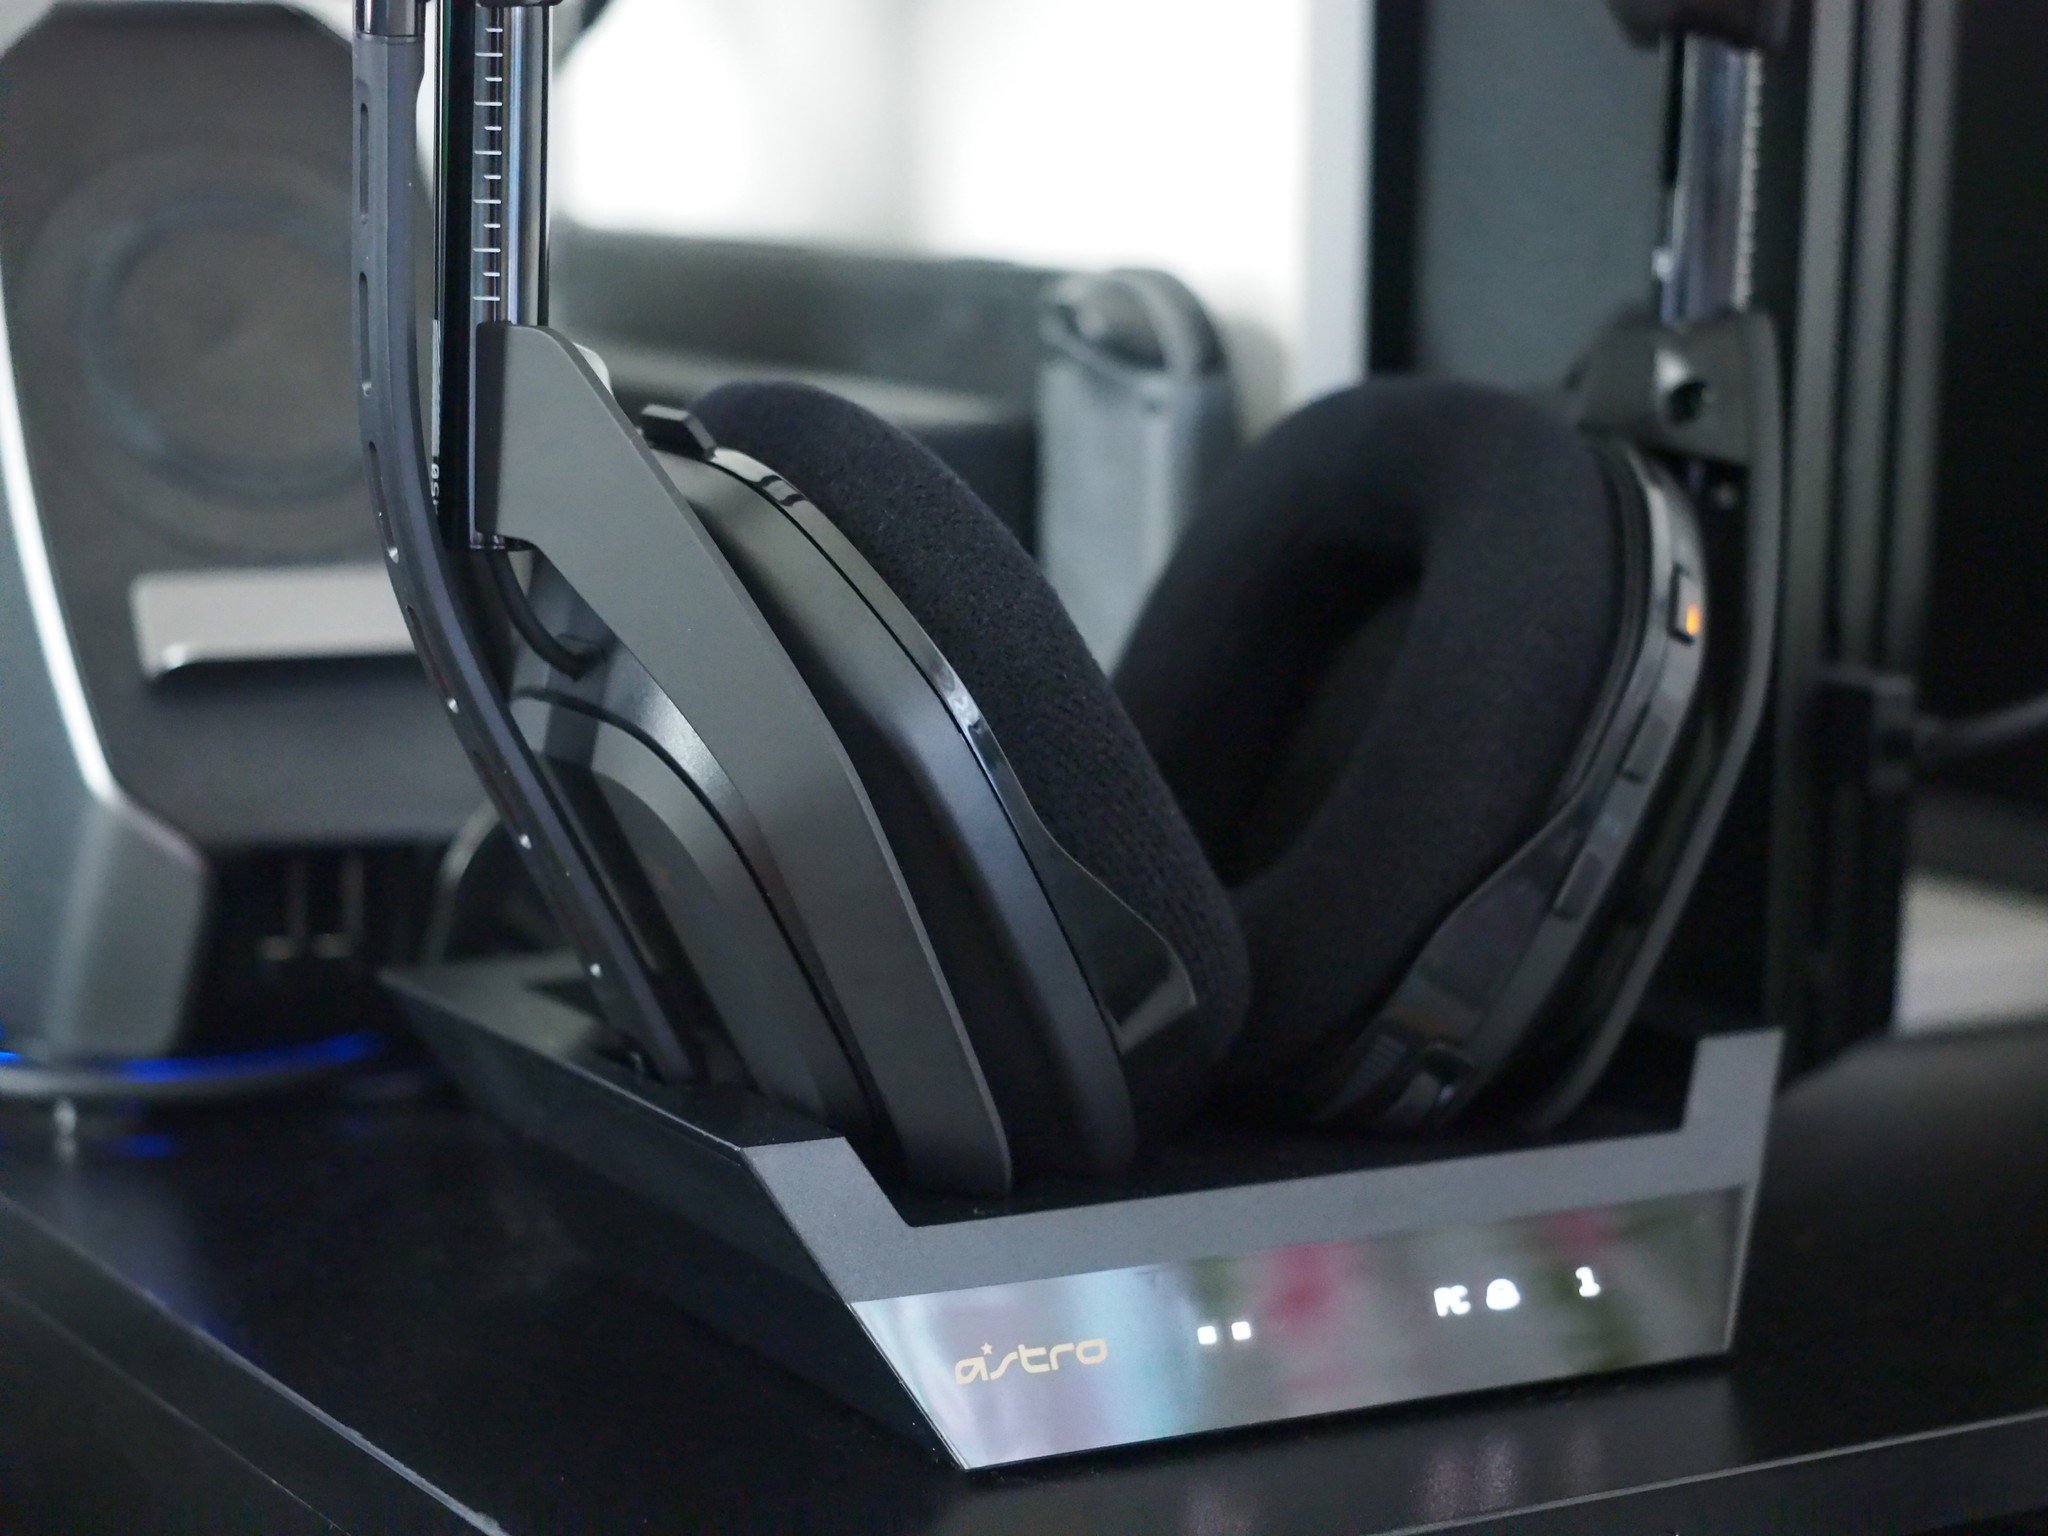 astro-a50-2019-review_7.jpg